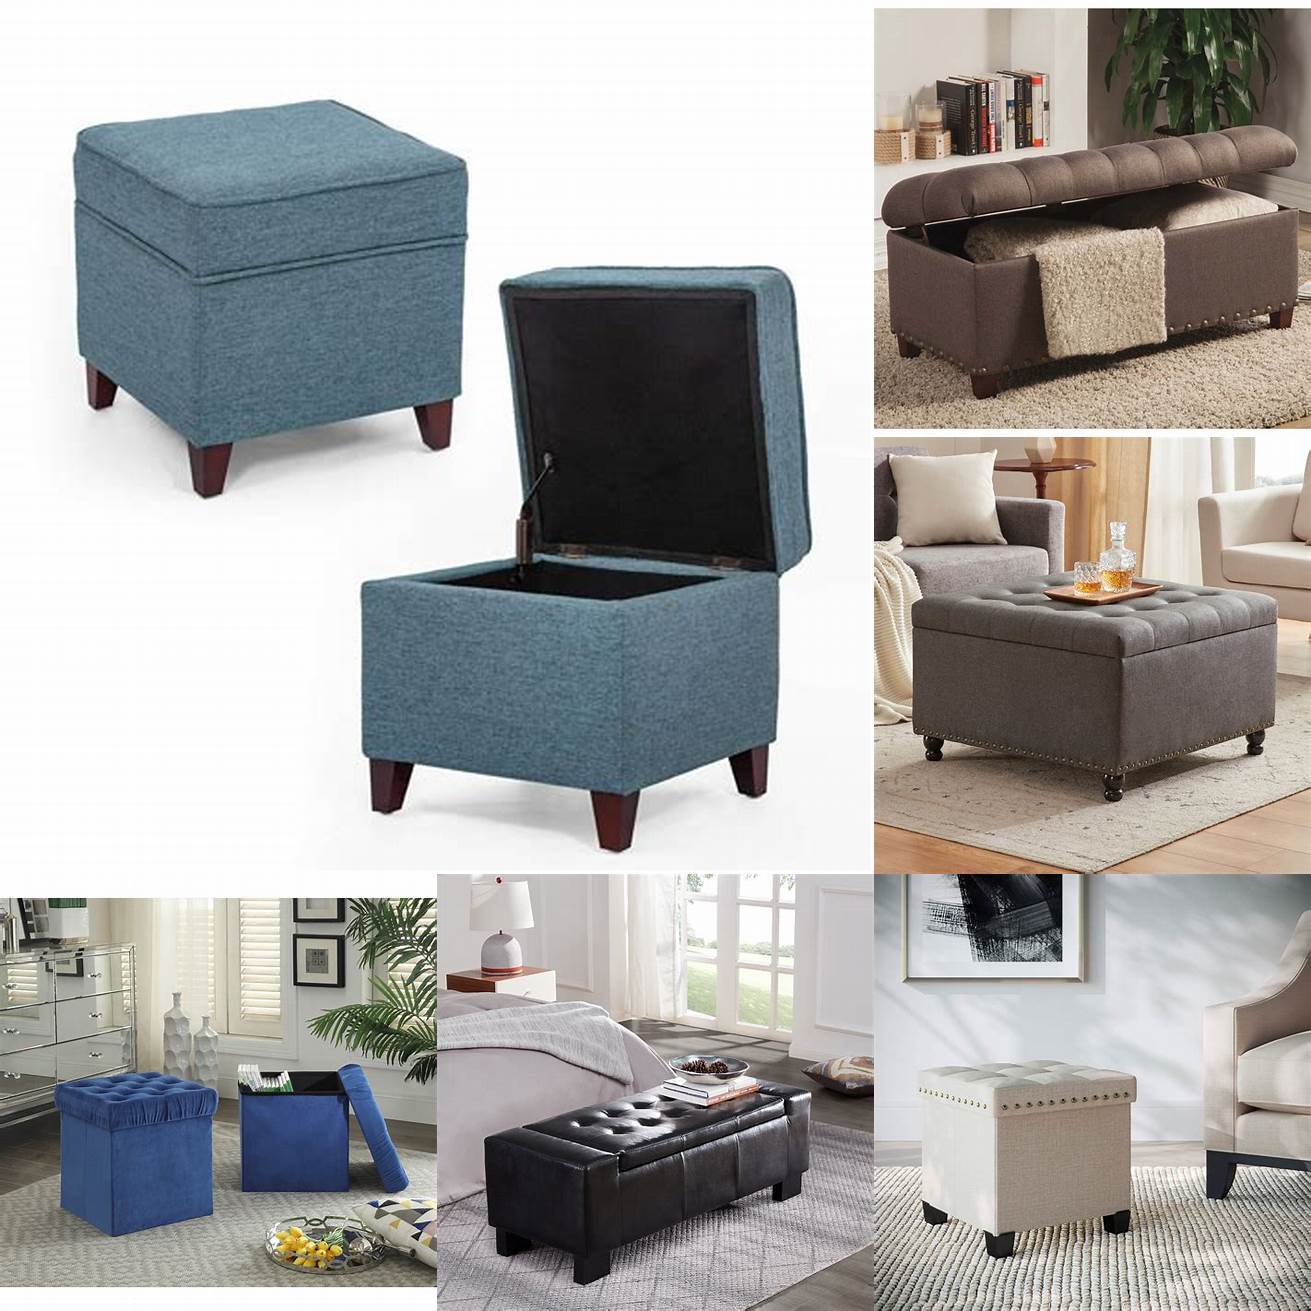 A storage ottoman can serve as a footrest or extra seating while also providing storage space for blankets pillows or other items